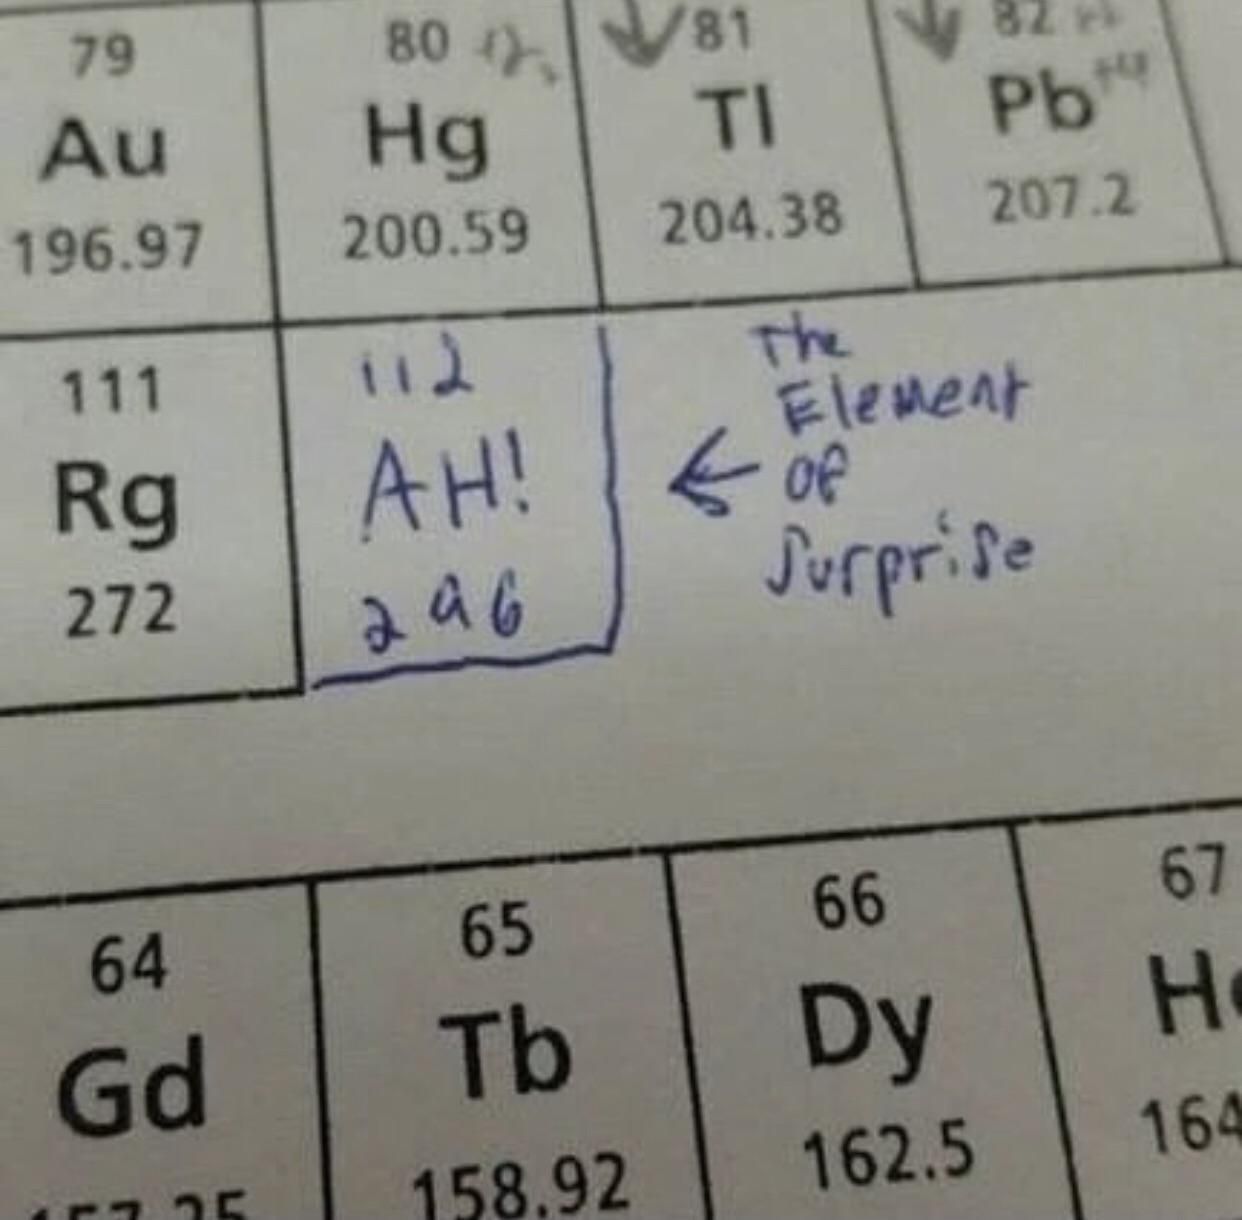 The newest element